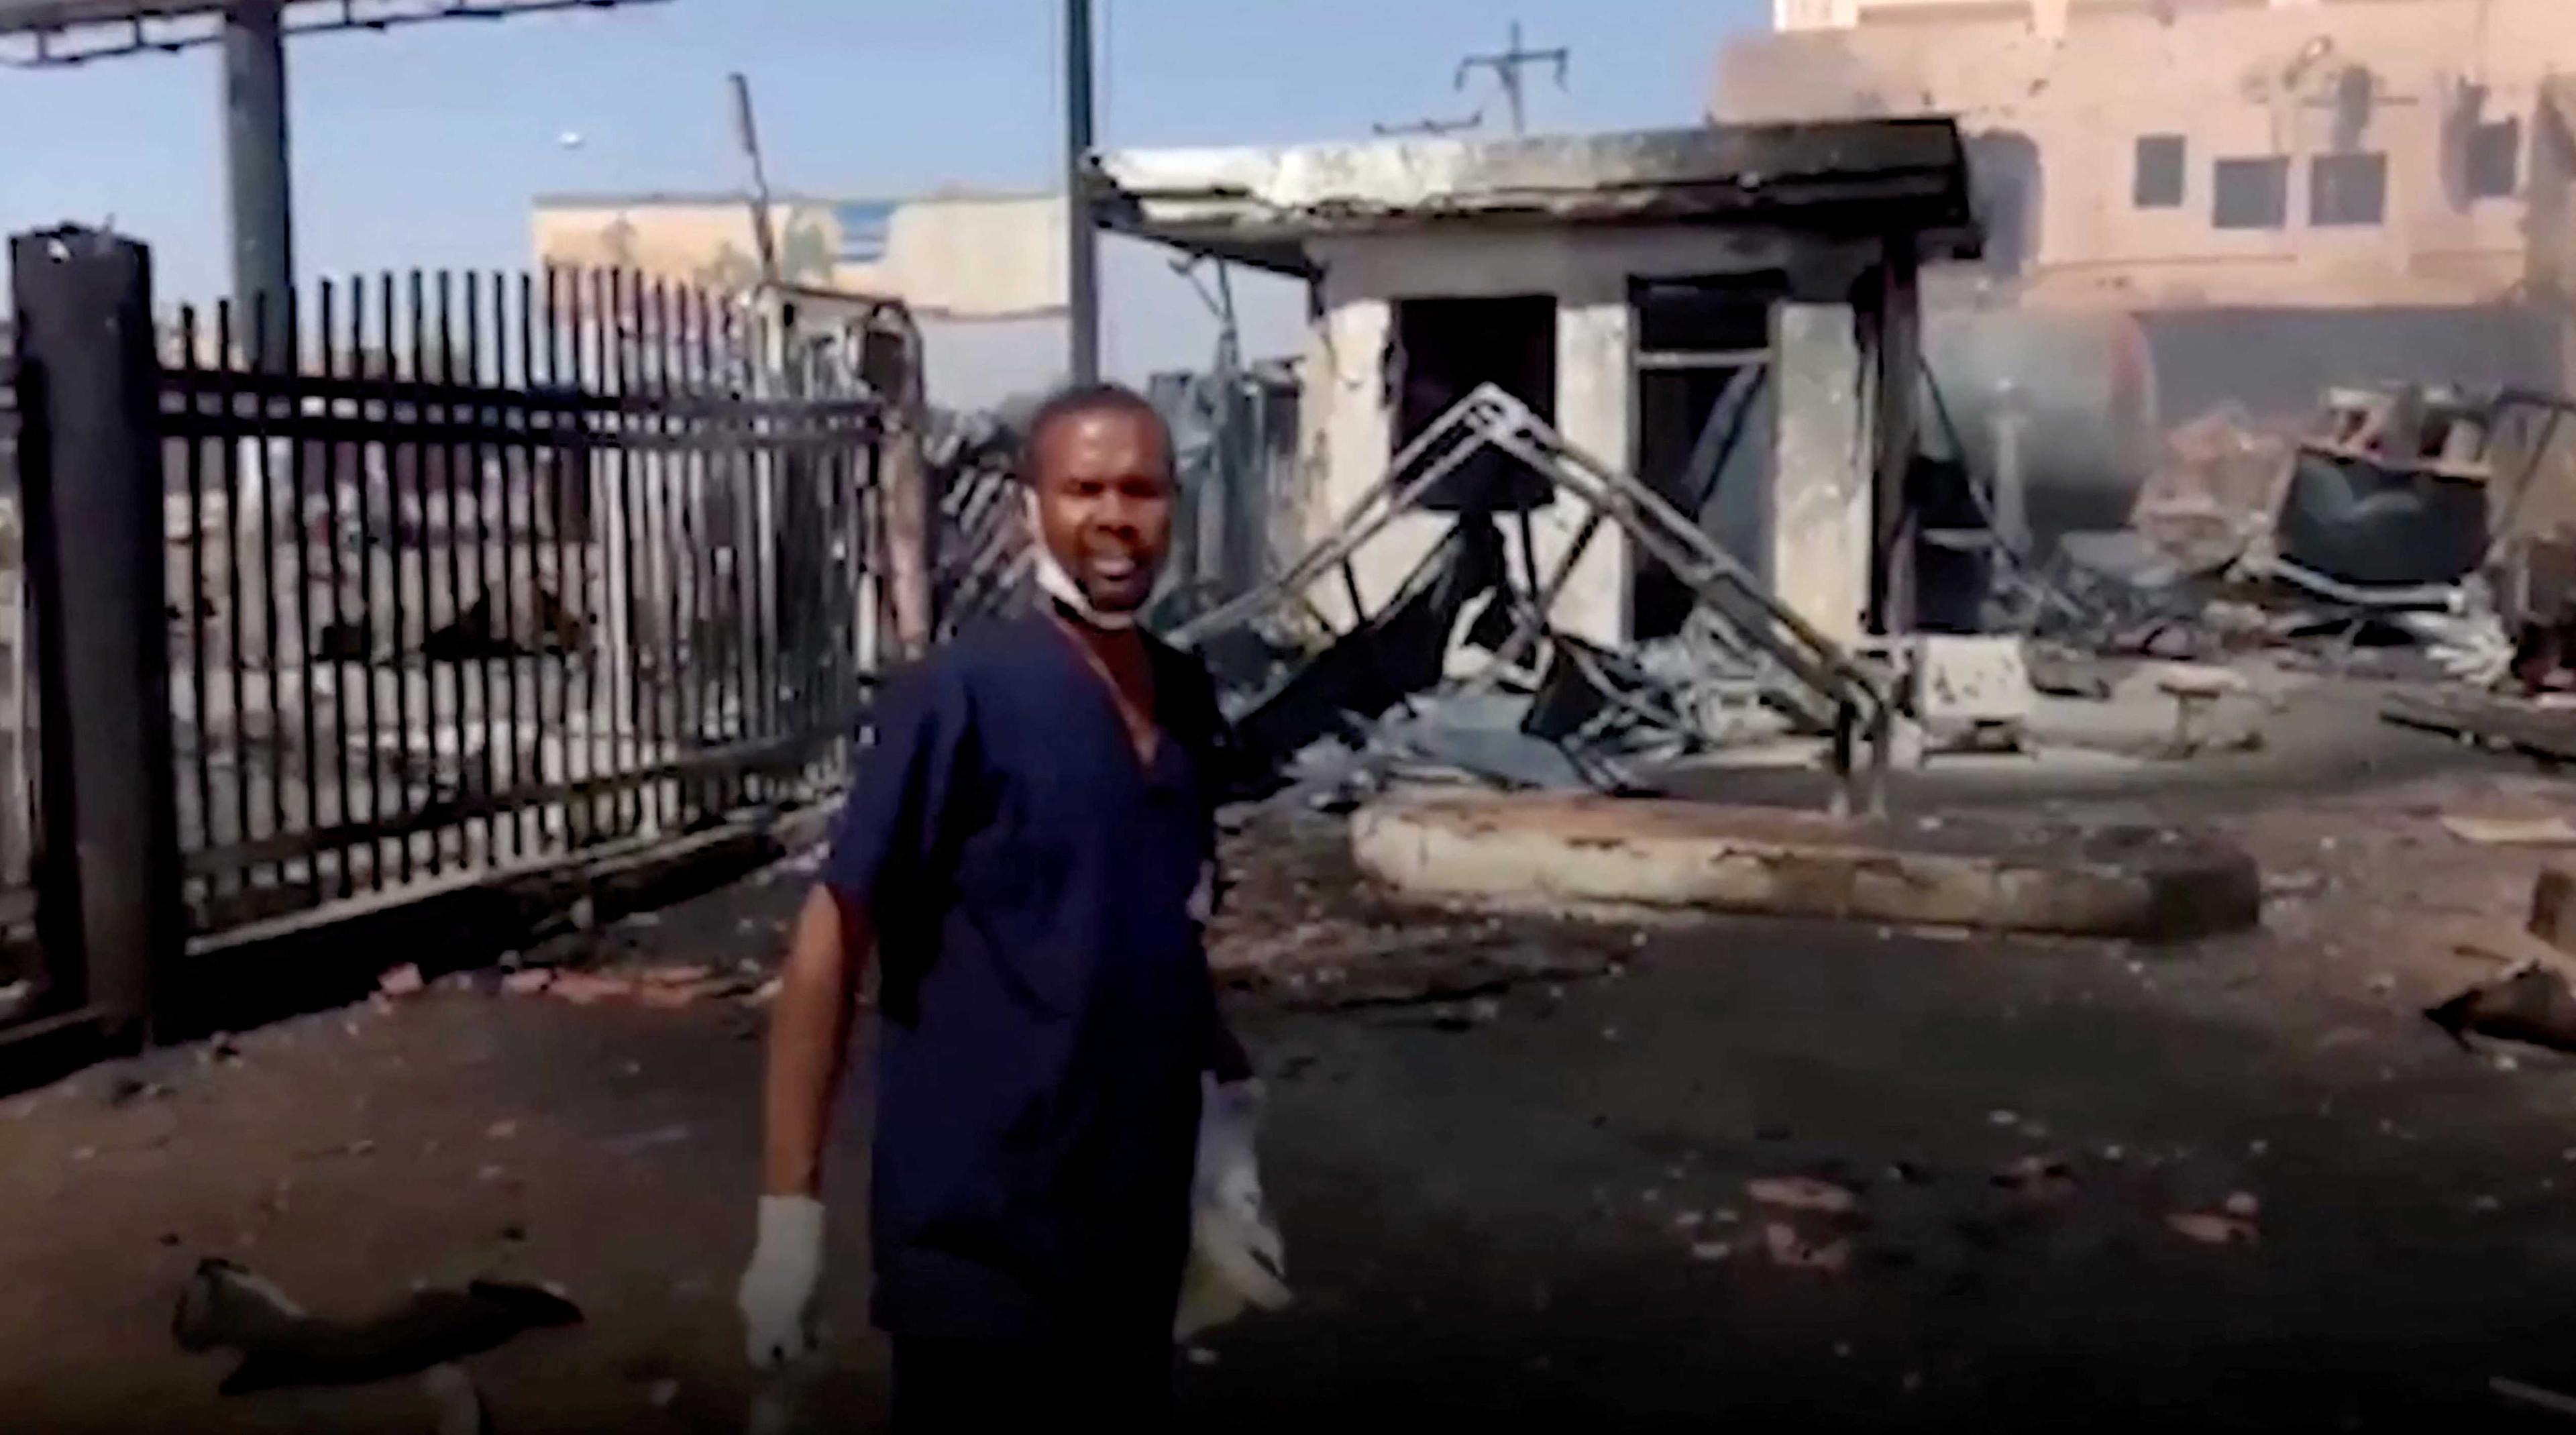 A doctor points at the damage outside the East Nile Hospital in Khartoum, Sudan, in this screen grab taken from a social media video released on May 15. Photo: Reuters